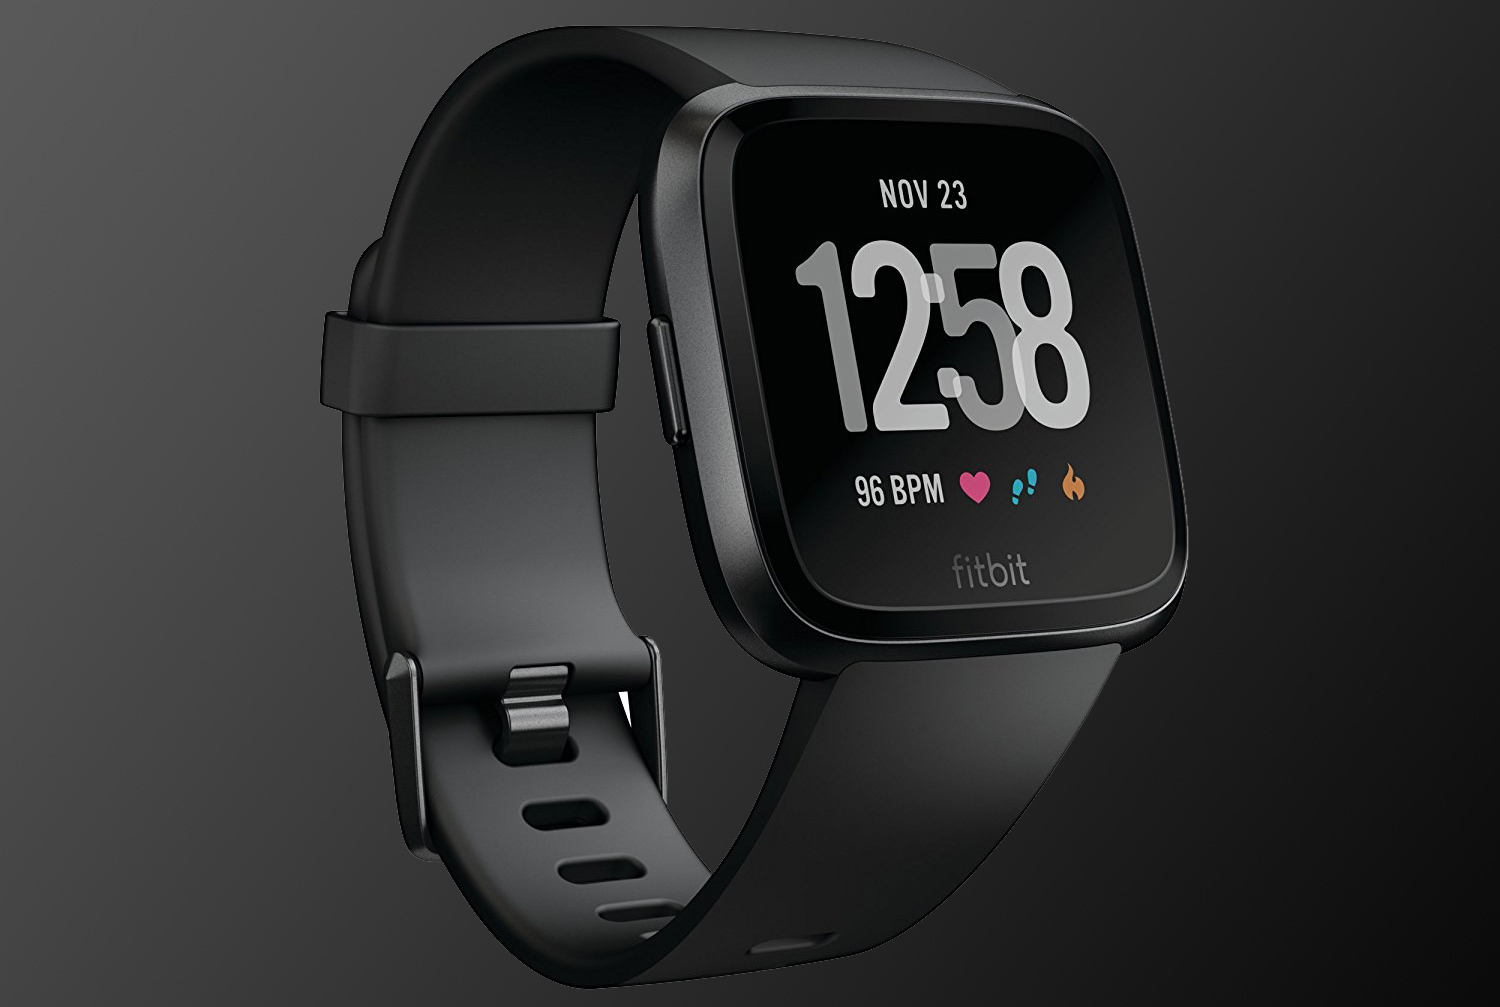 The hot new Fitbit Versa smartwatch with 4-day battery life just